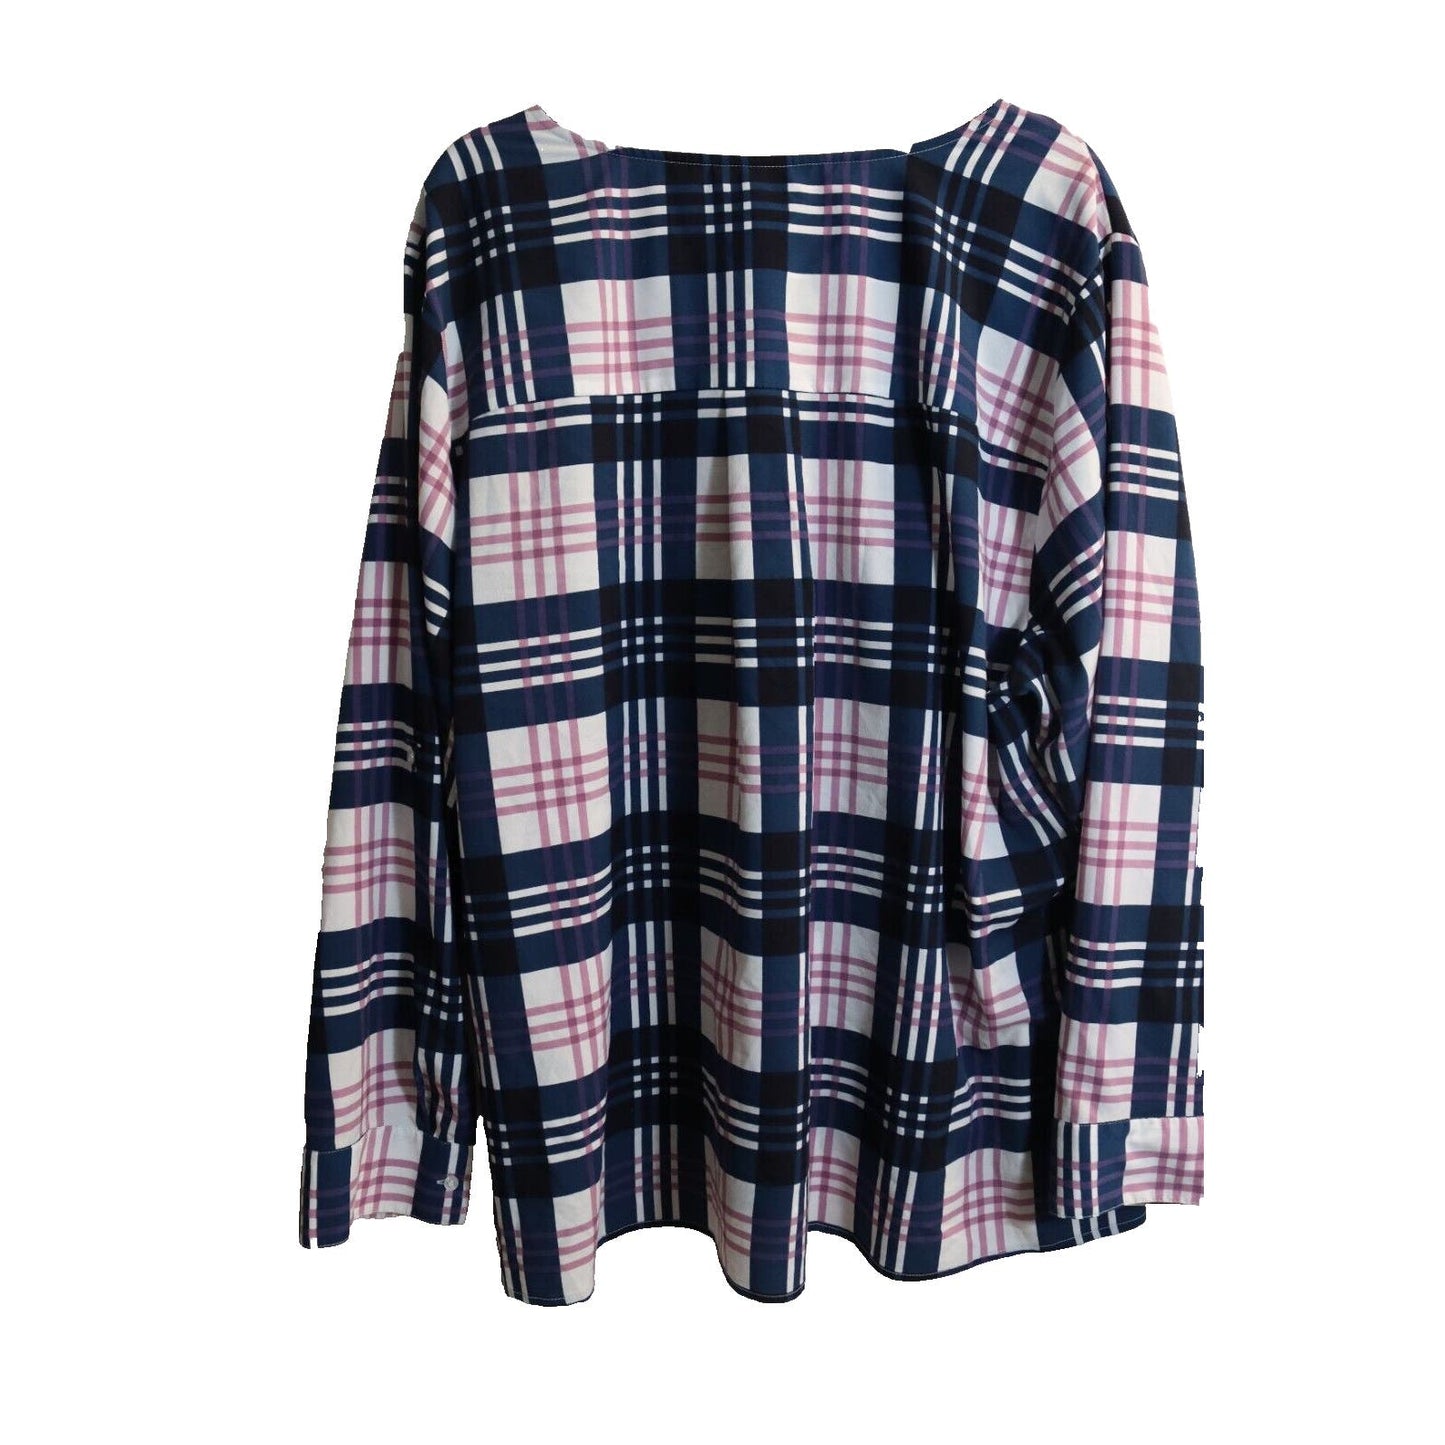 Lane Bryant Navy Pink White Plaid Long Sleeved Top Size 26/28